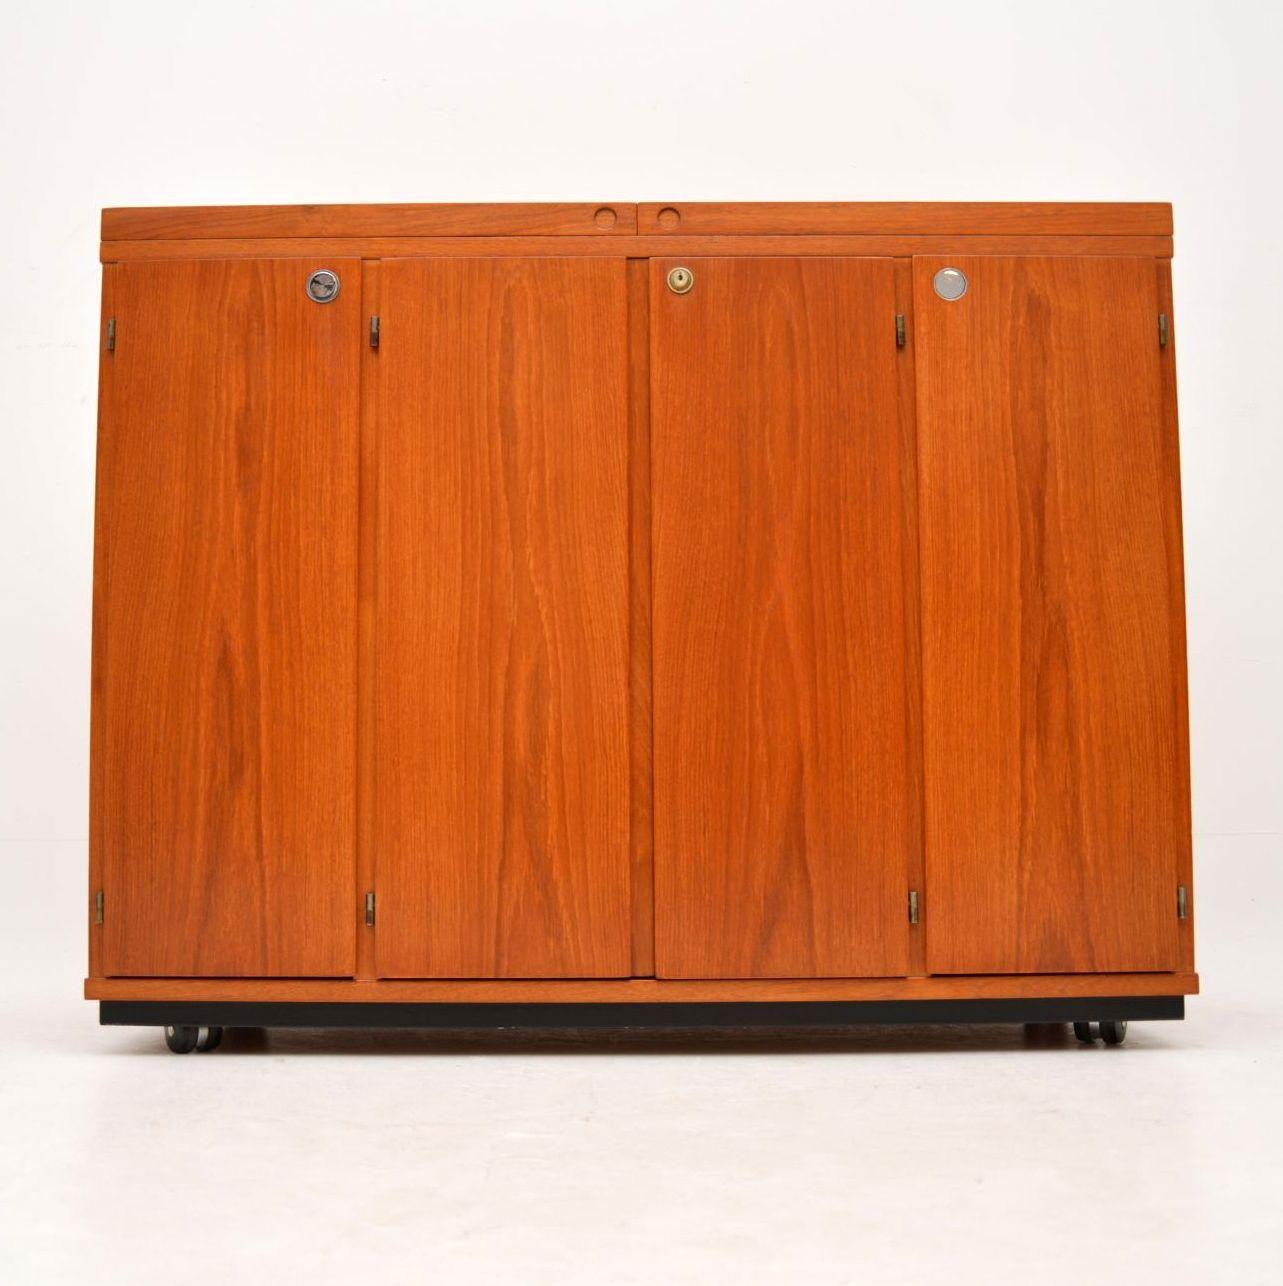 A stunning and very rare captains bar / cabinet in teak, this was made in Denmark by Dyrlund, it dates from the 1960s. The quality is amazing, and the condition is superb throughout; we have had this stripped and re-polished to a very high standard.